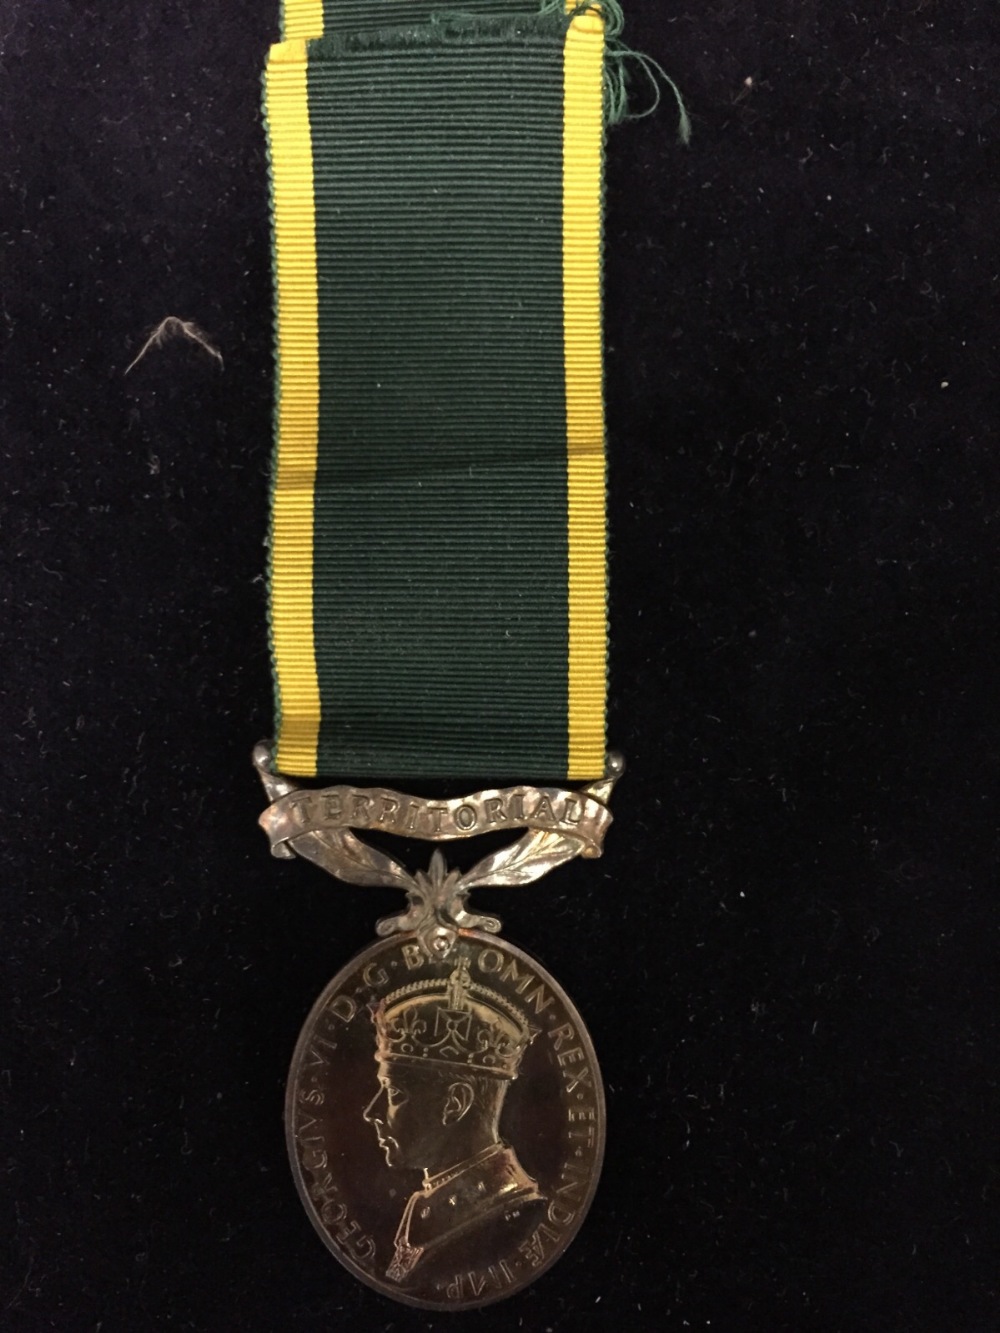 Territorial Army Medal